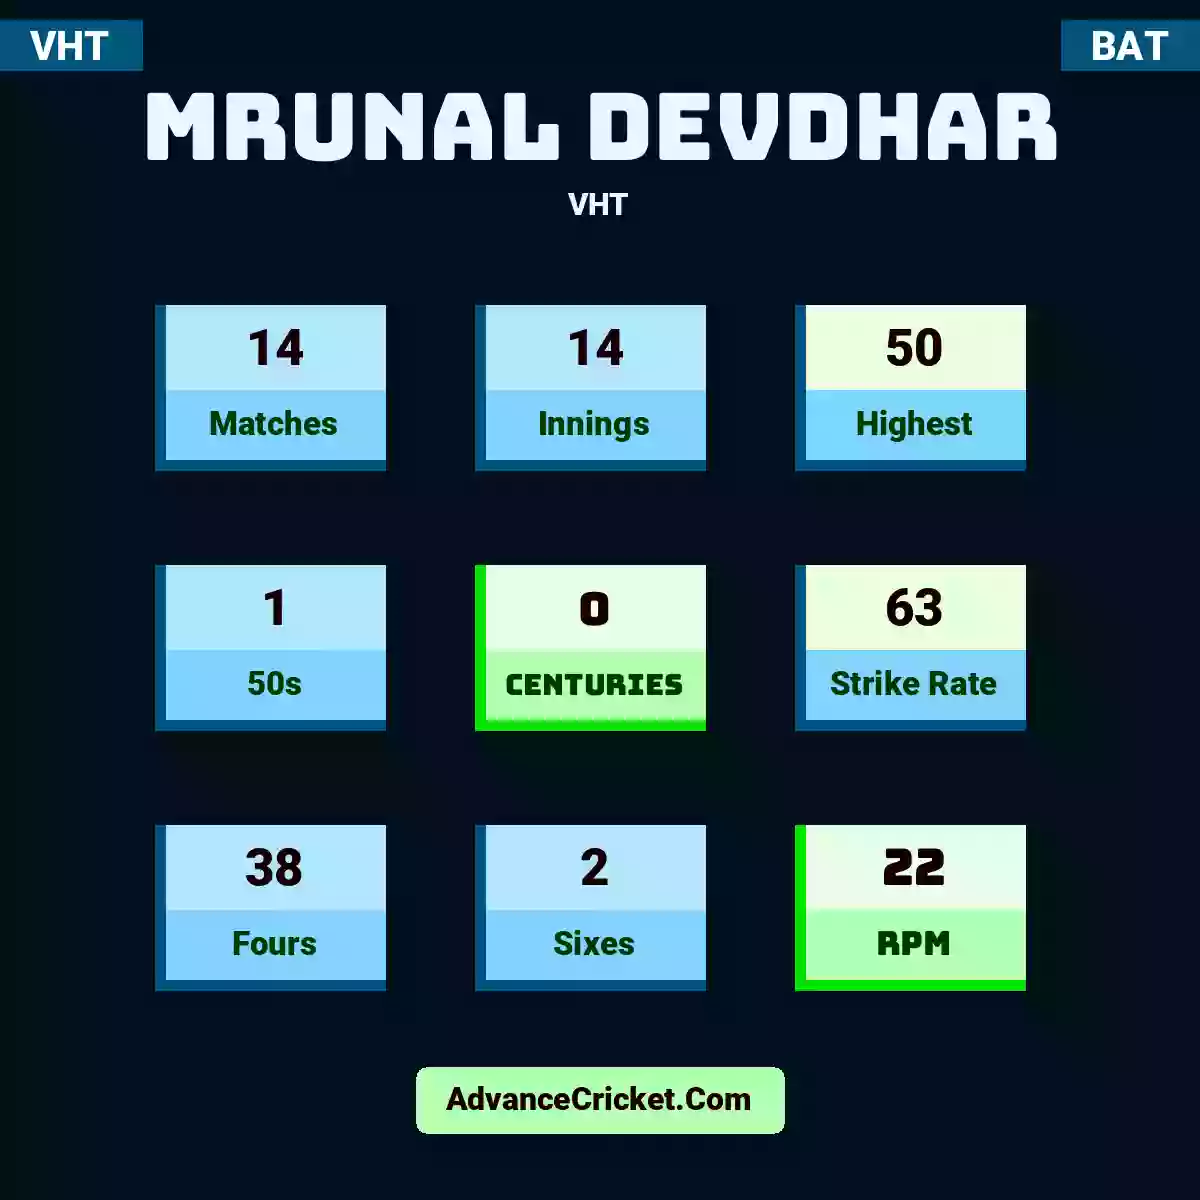 Mrunal Devdhar VHT , Mrunal Devdhar played 14 matches, scored 50 runs as highest, 1 half-centuries, and 0 centuries, with a strike rate of 63. M.Devdhar hit 38 fours and 2 sixes, with an RPM of 22.